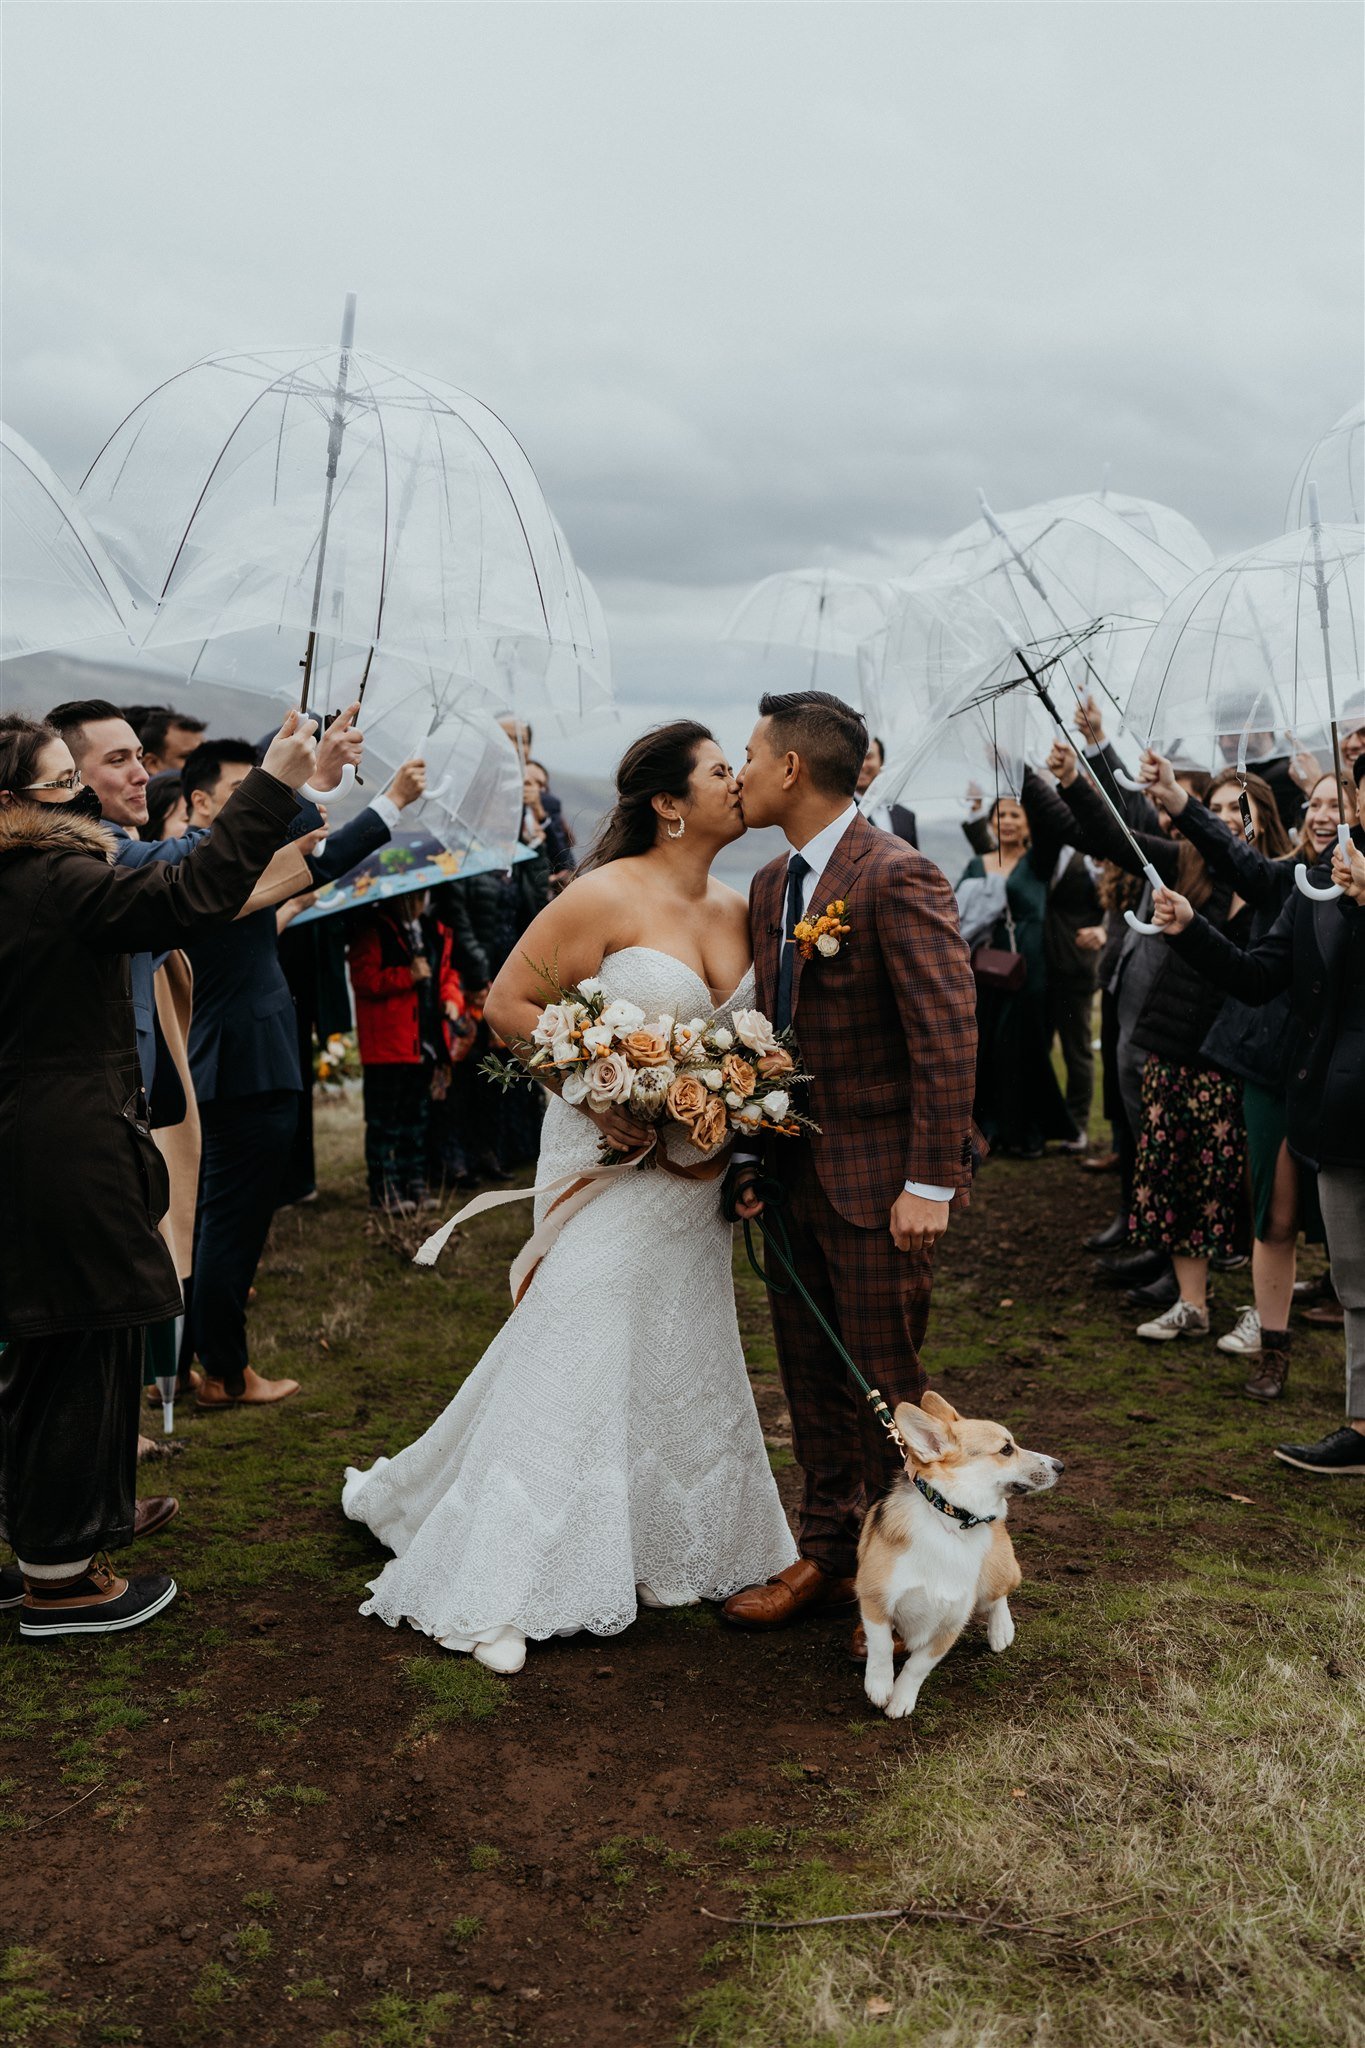 Bride and groom kiss while guests hold clear rain umbrellas